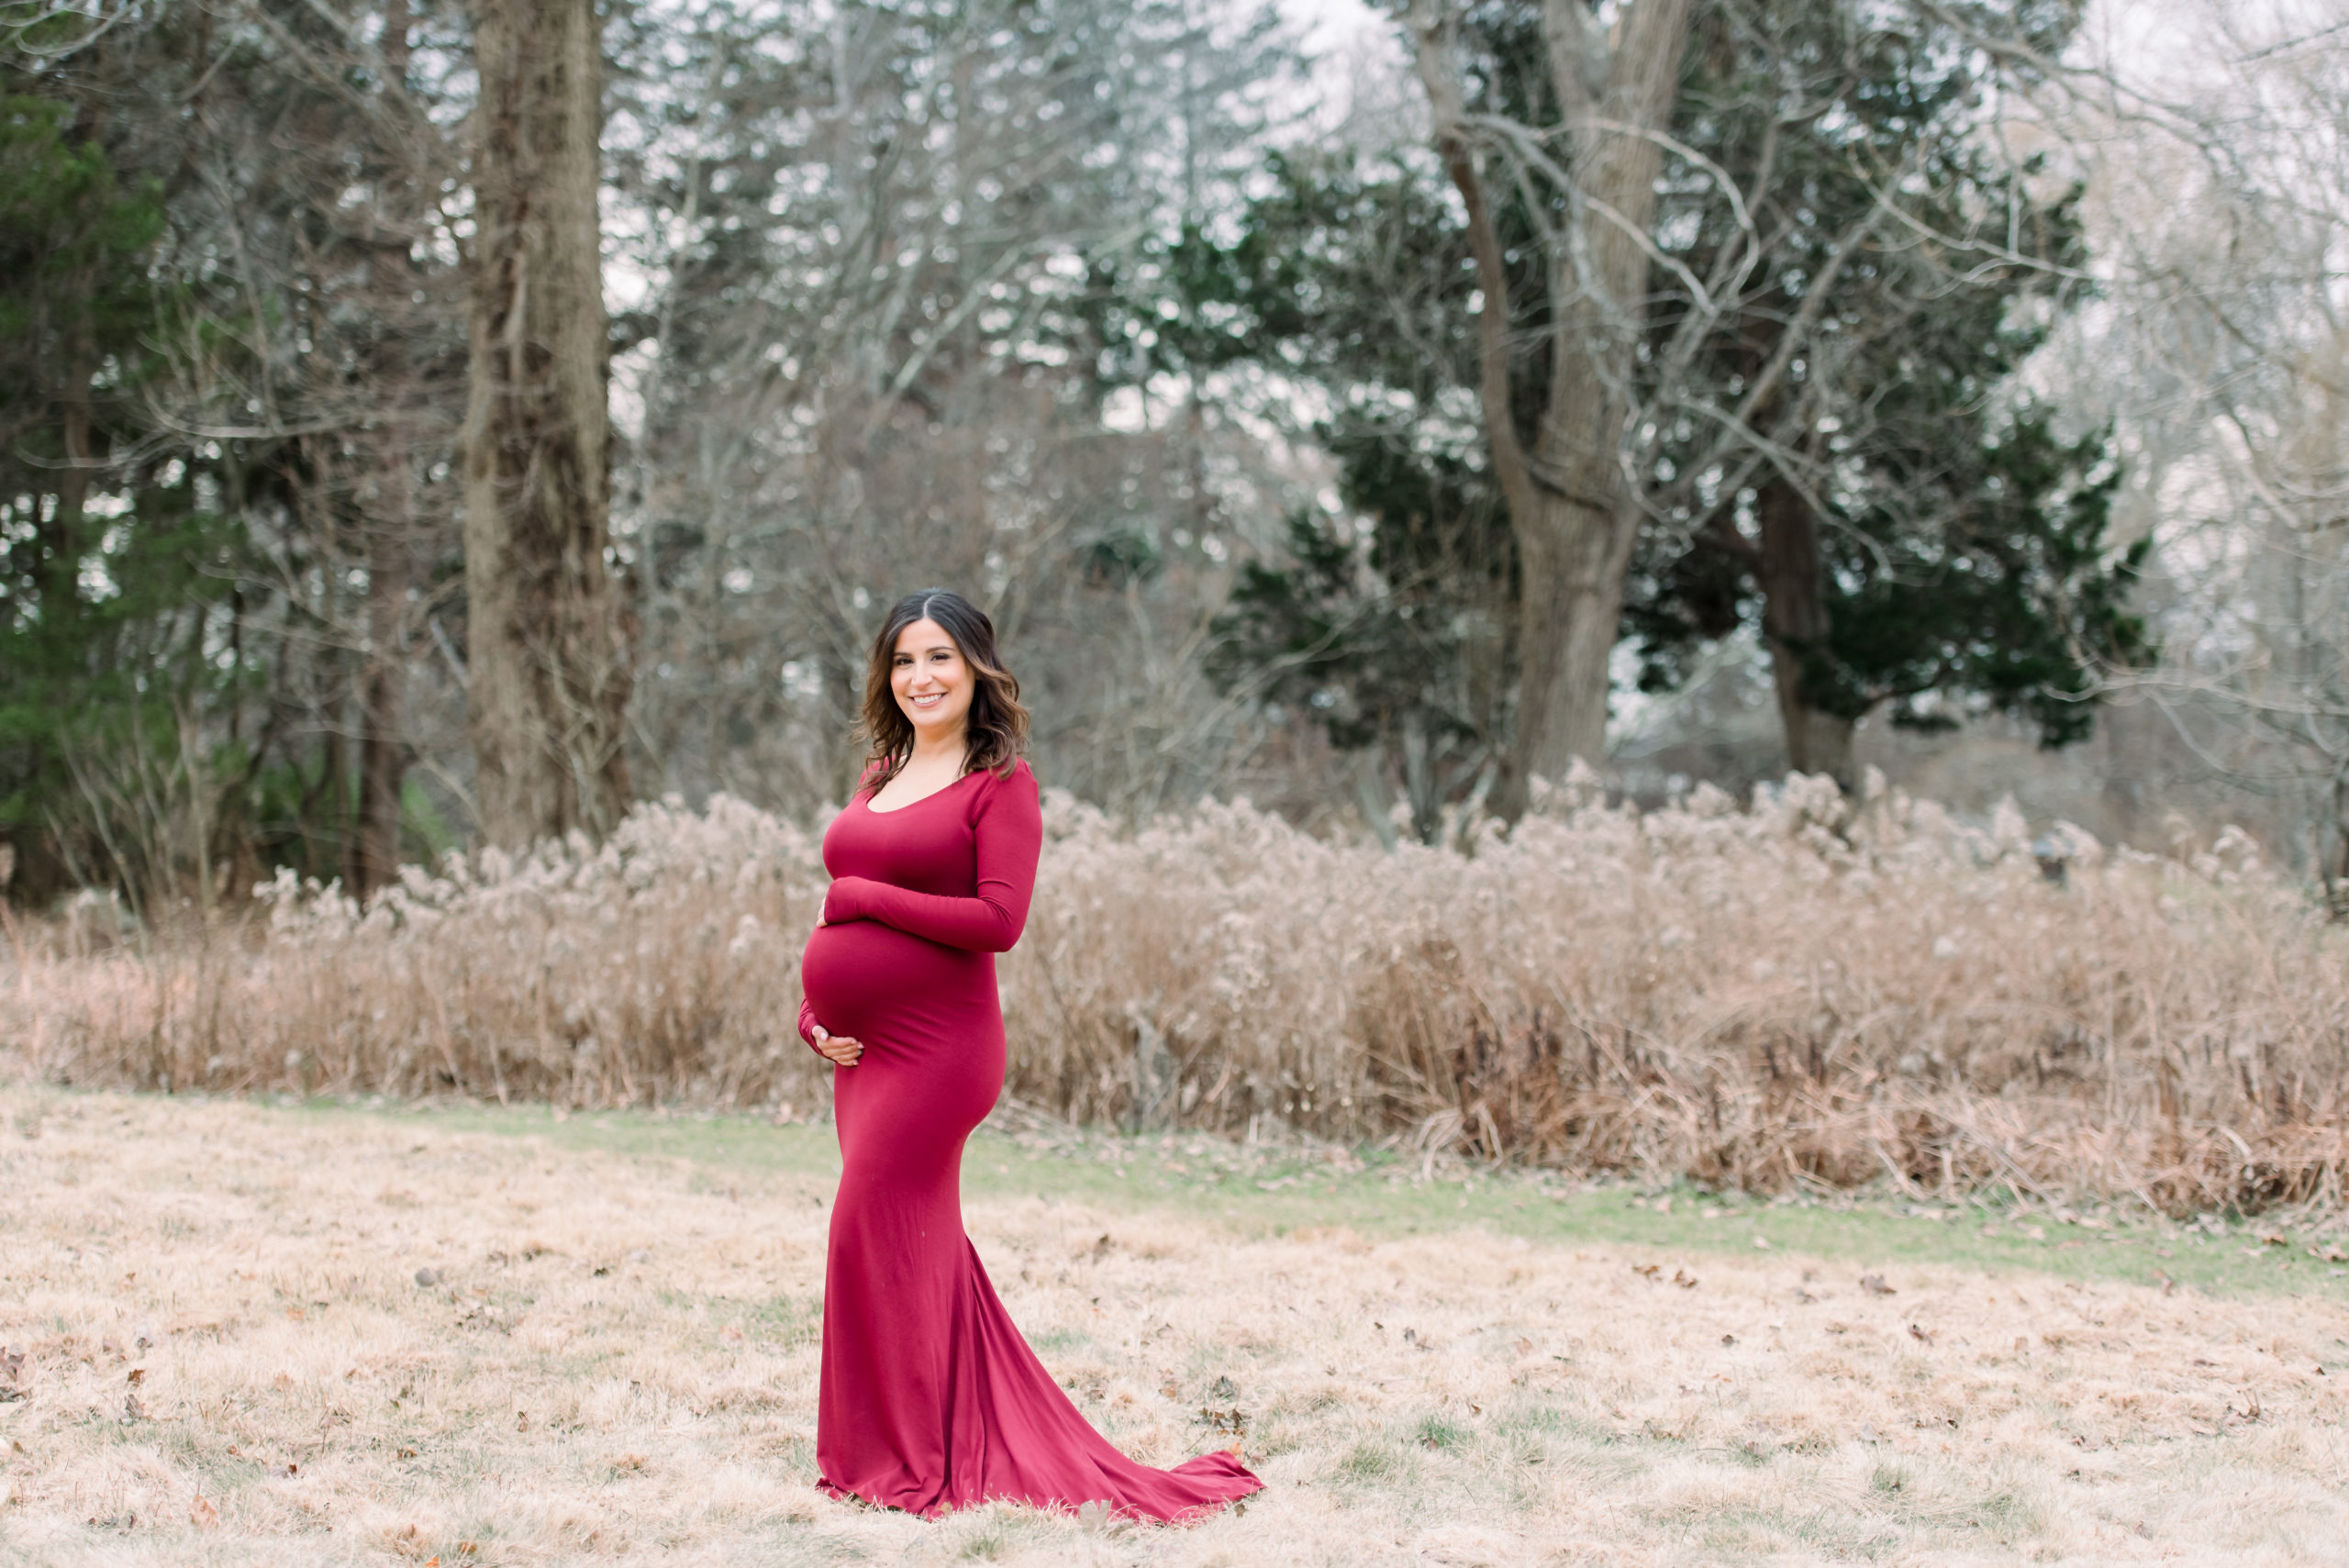 outdoor maternity session